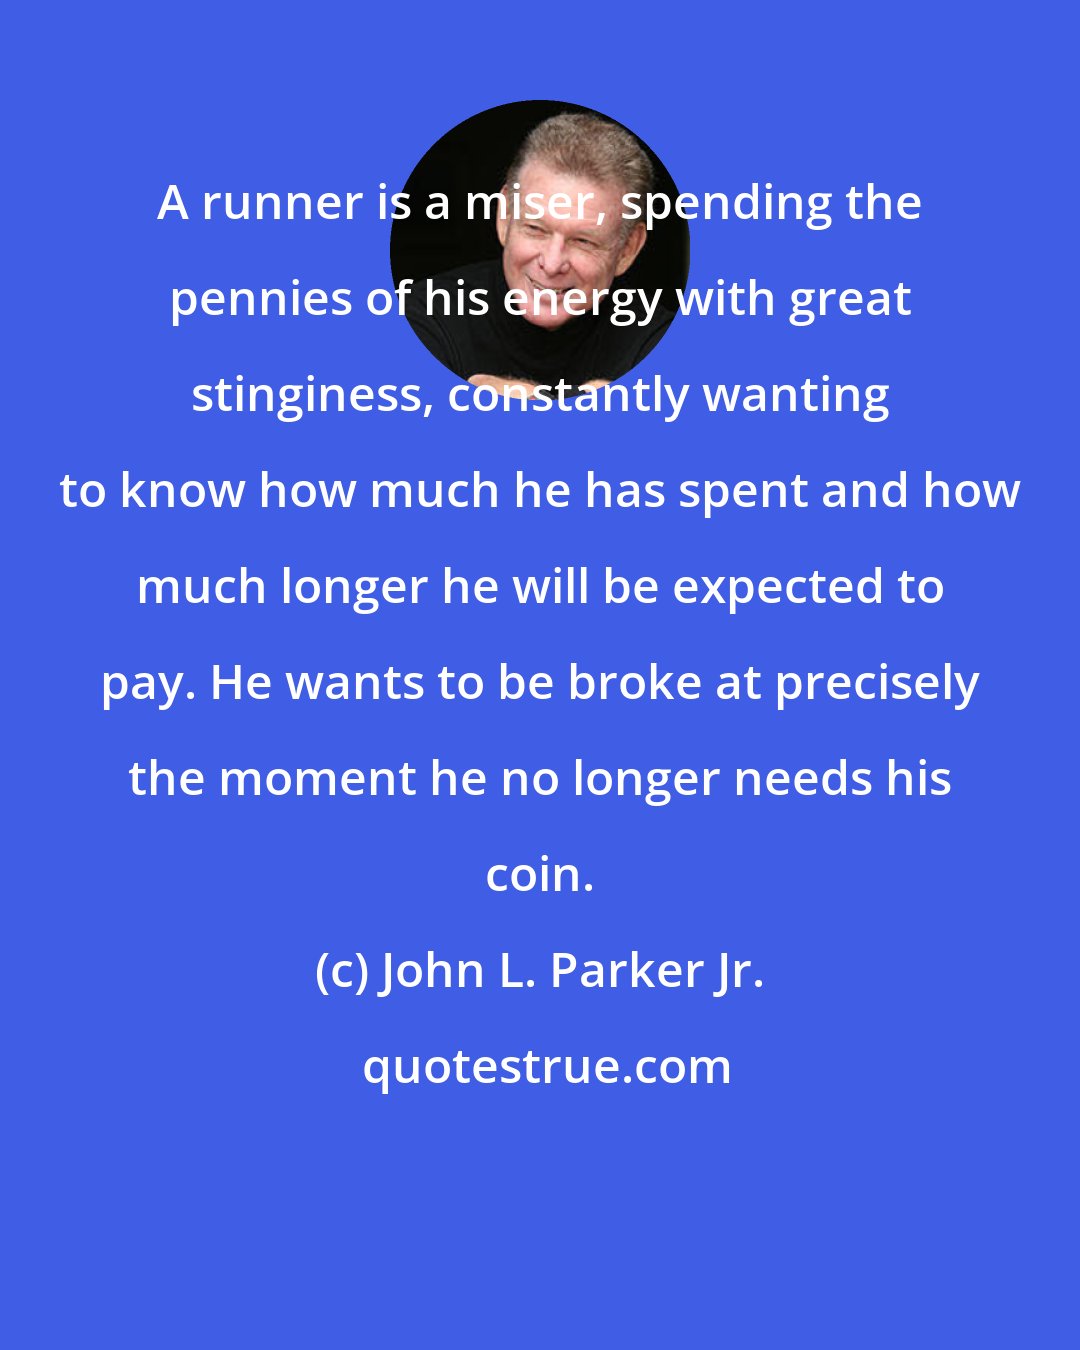 John L. Parker Jr.: A runner is a miser, spending the pennies of his energy with great stinginess, constantly wanting to know how much he has spent and how much longer he will be expected to pay. He wants to be broke at precisely the moment he no longer needs his coin.